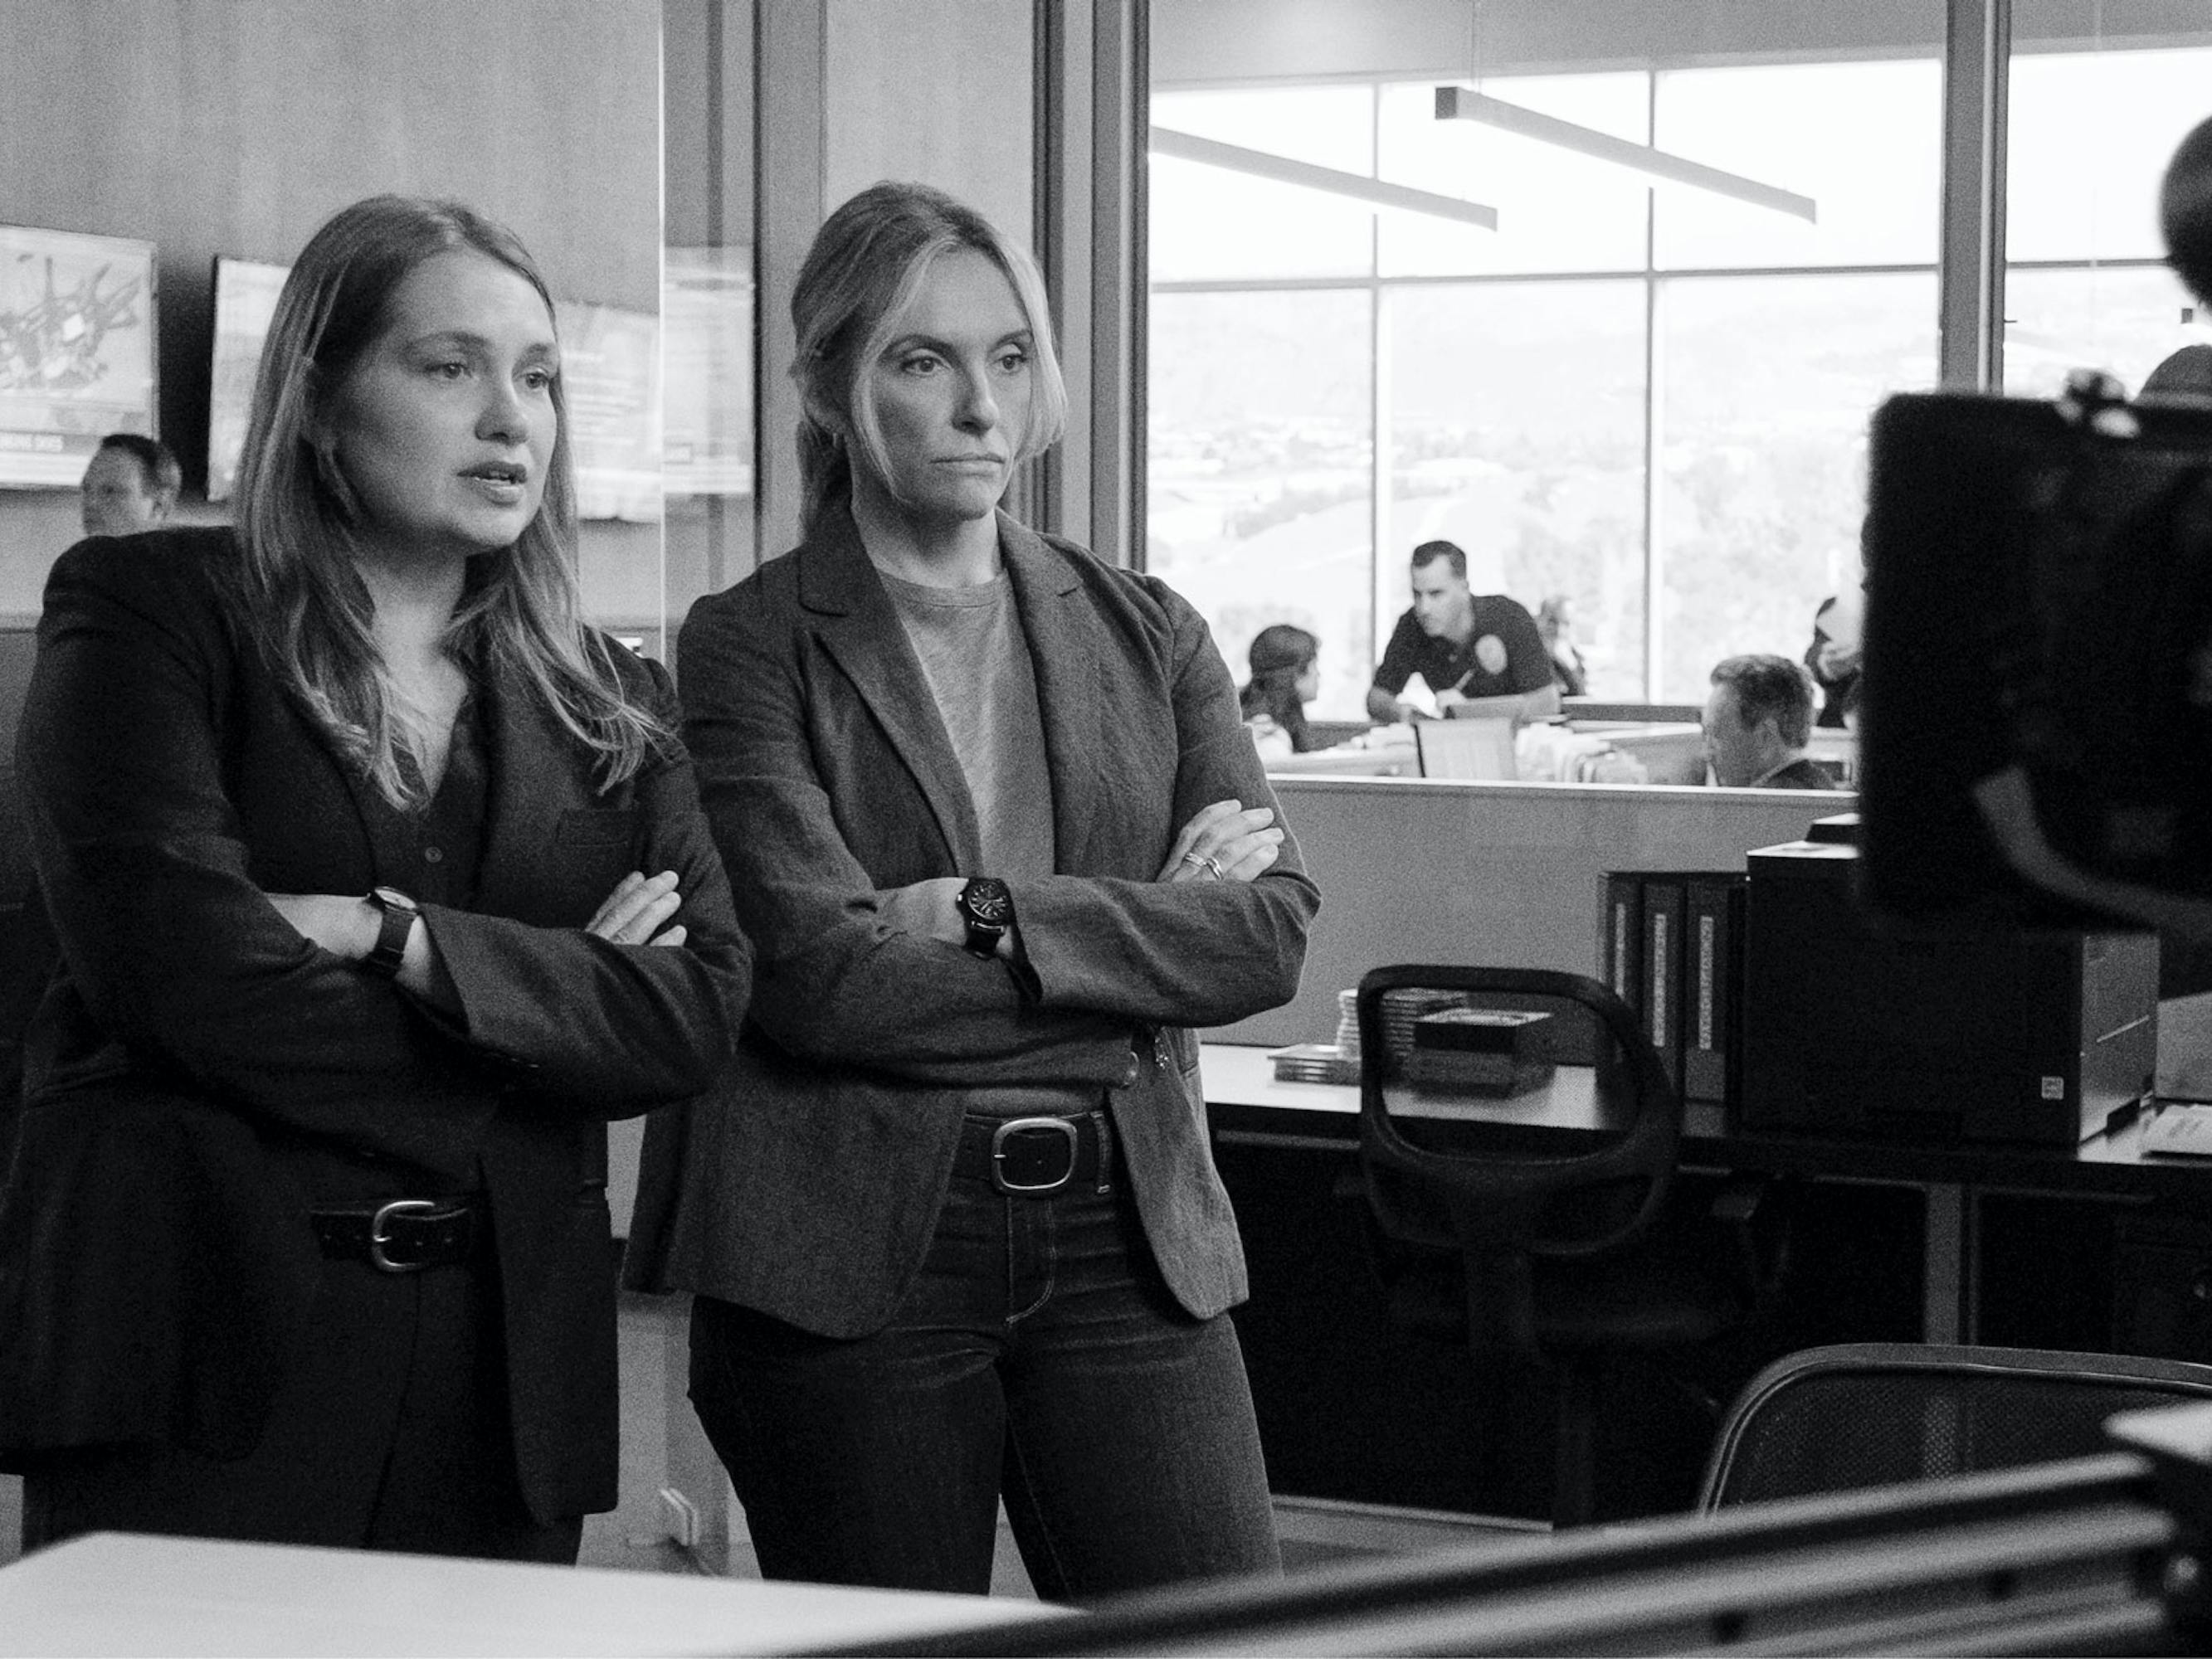 Toni Collette and Merritt Wever wear blazers and cross their arms across their chests.